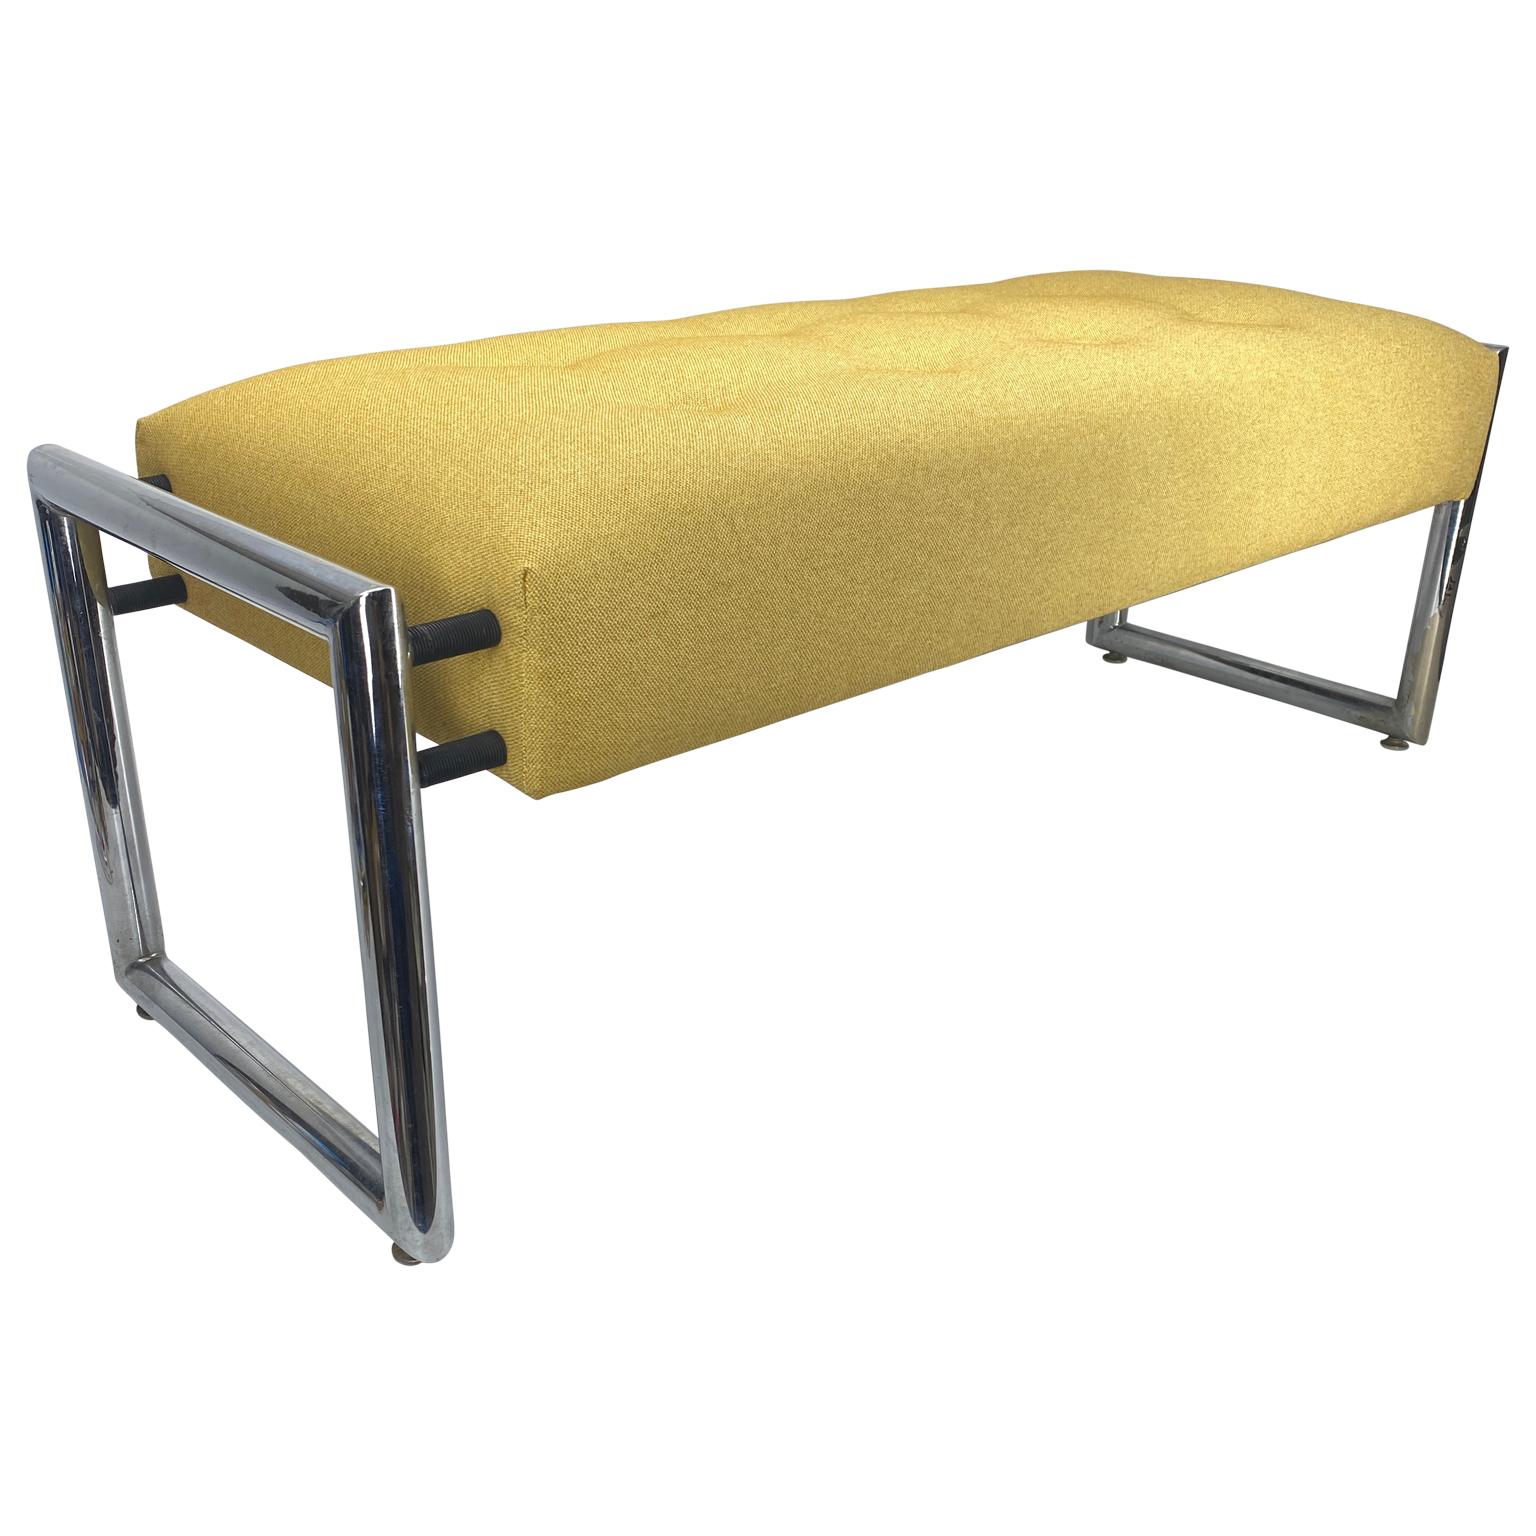 Mid-Century Modern chrome bench with Knoll yellow tufted upholstery, circa 1970's.
Fabulous and fun Mid-Century Modern chrome bench has tubular chrome legs and is very comfortable with cushiony tufted new upholstered seat. The bench is perfect for a